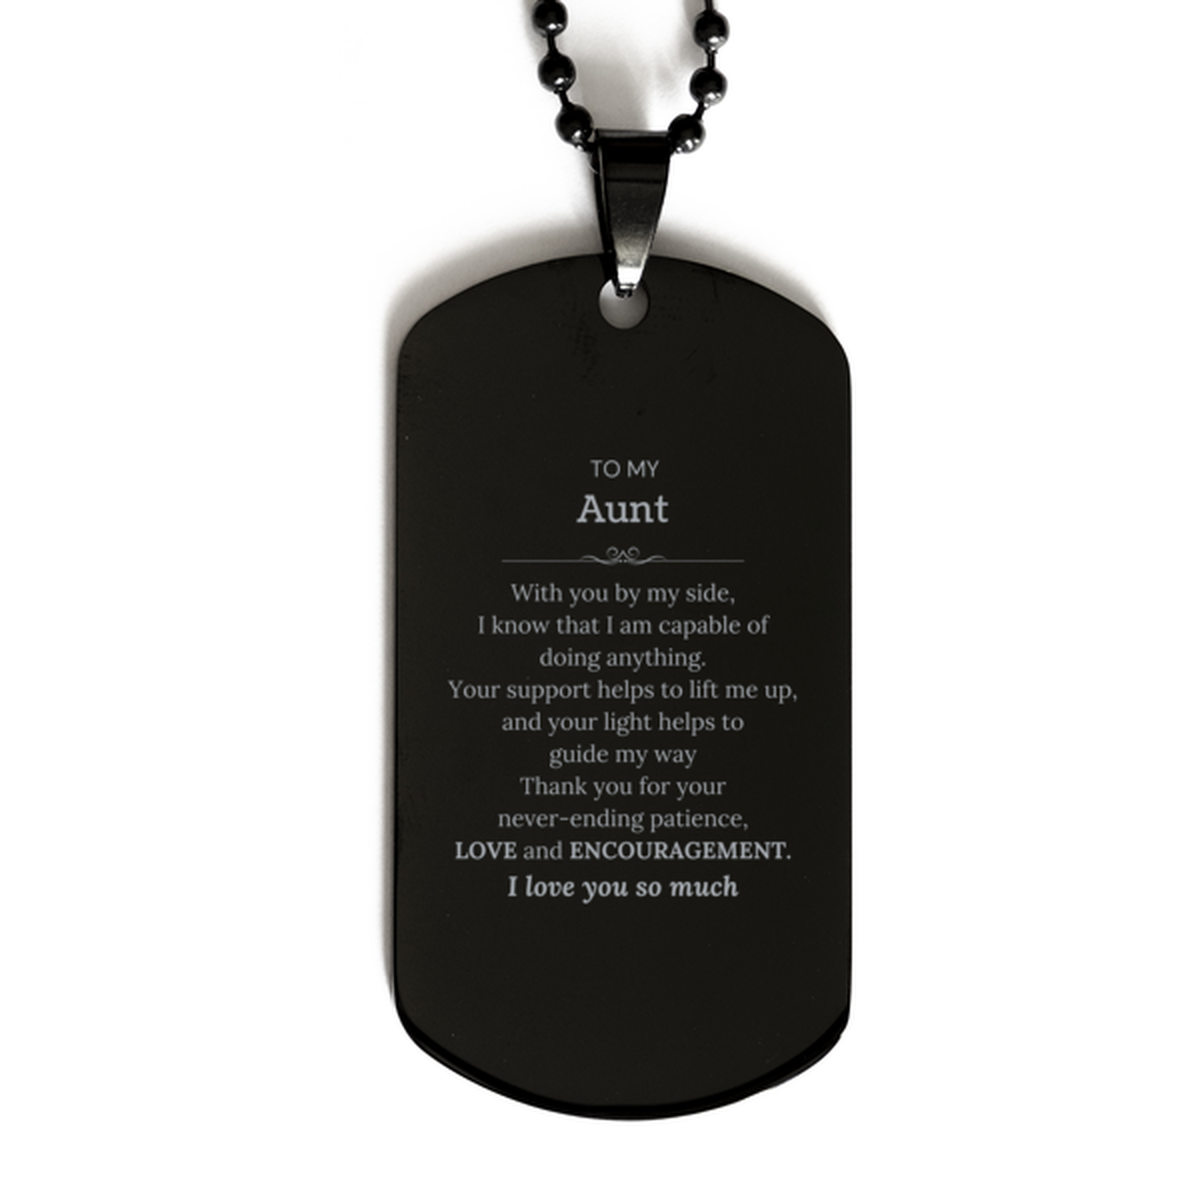 Appreciation Aunt Black Dog Tag Gifts, To My Aunt Birthday Christmas Wedding Keepsake Gifts for Aunt With you by my side, I know that I am capable of doing anything. I love you so much